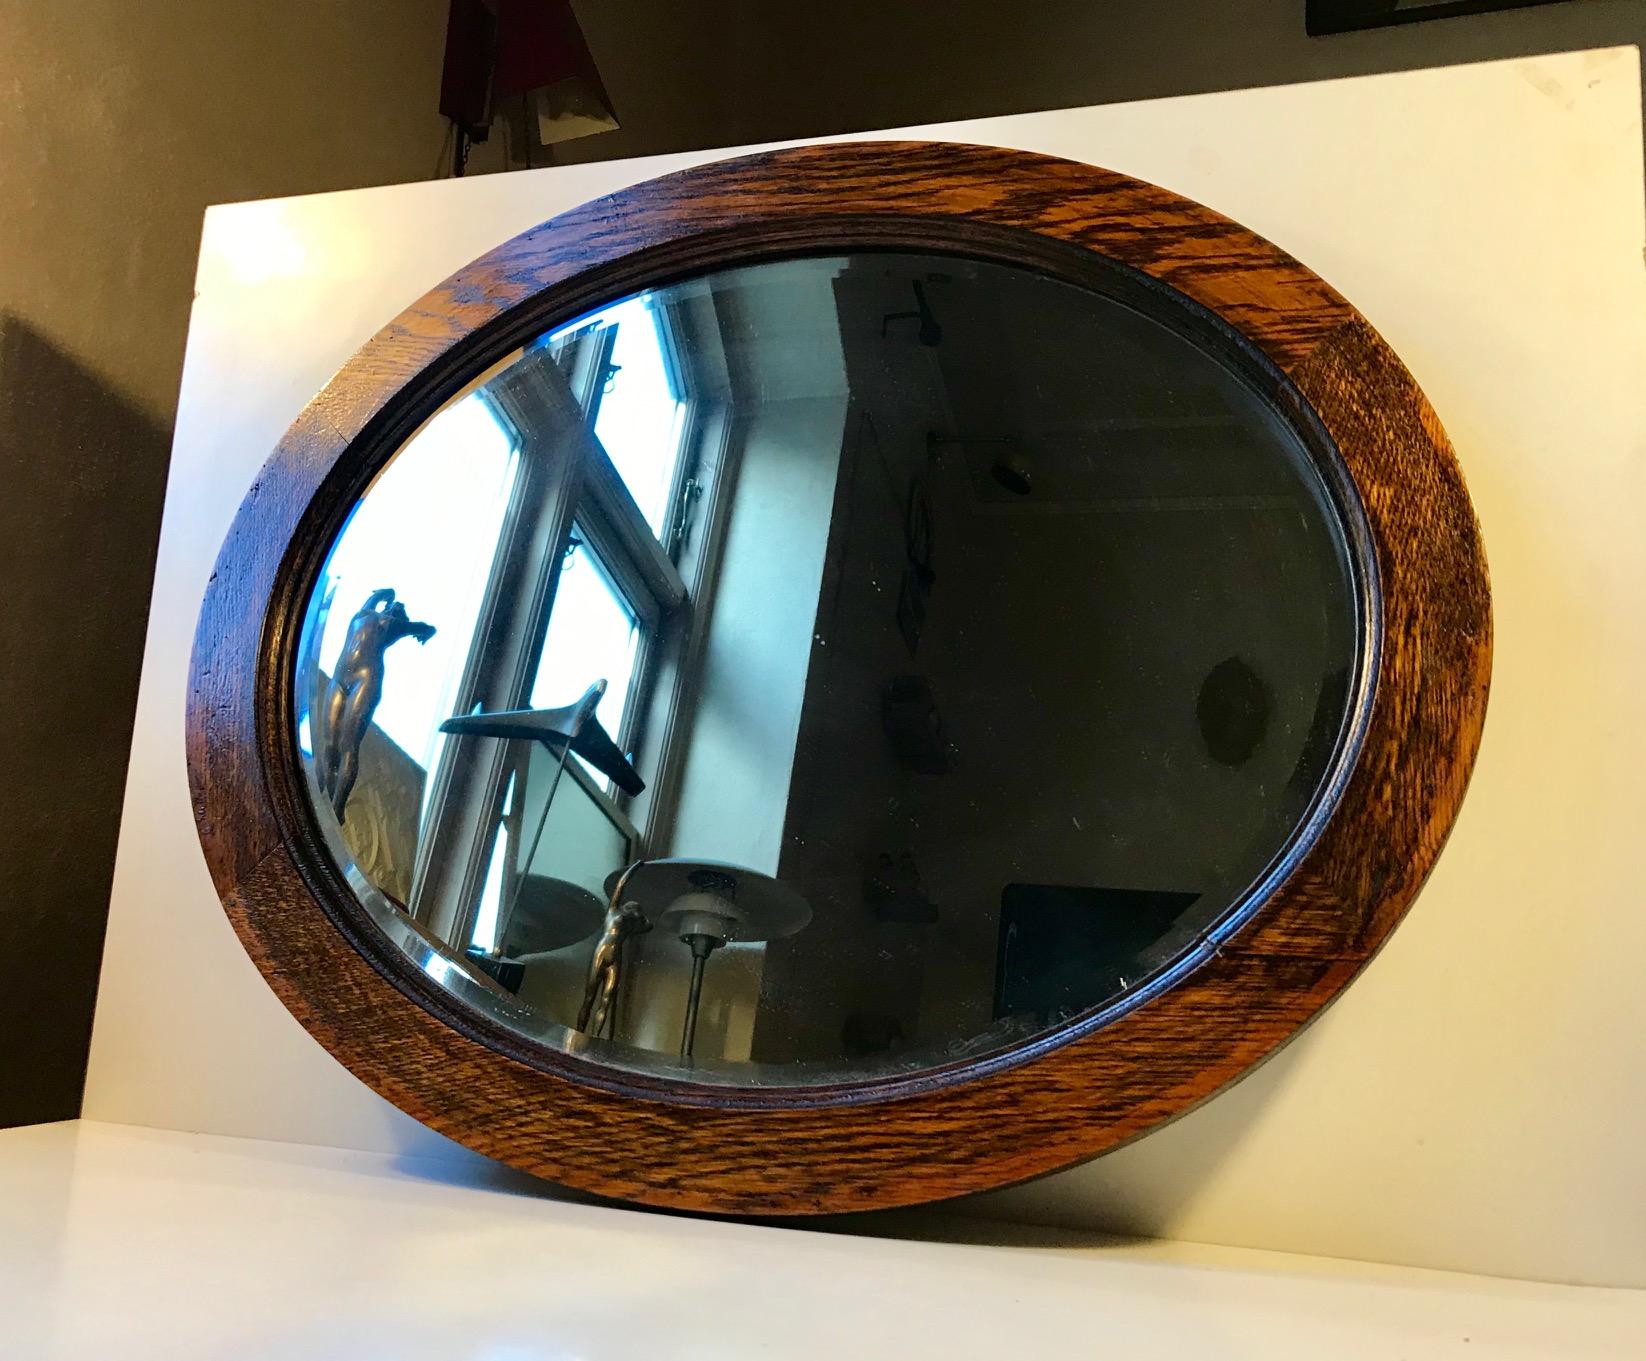 Beveled wall mirror with solid cross-cut oak frame. Made by an English furniture maker, circa 1920-1925. It has cork implements to the backside that allows it to hang straight/leveled on the wall.